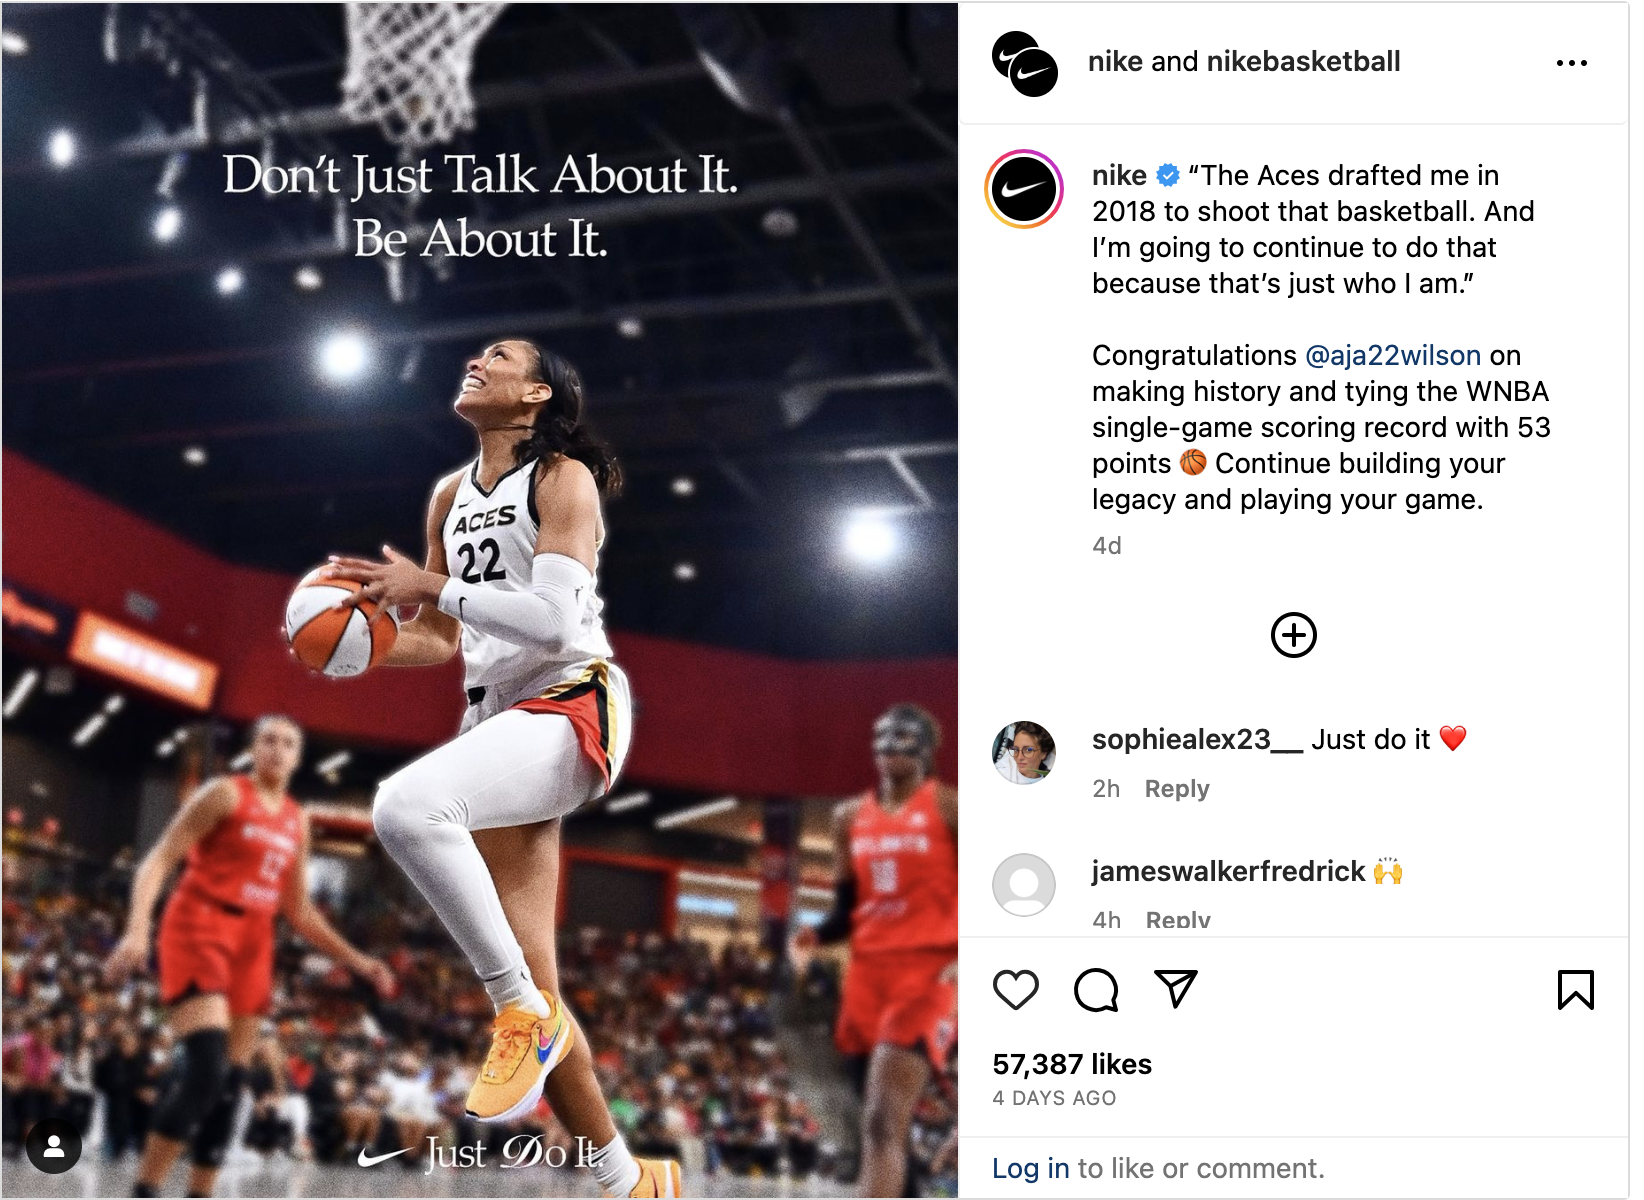 Nike-s Instagram post testifying their consistent social media content strategy